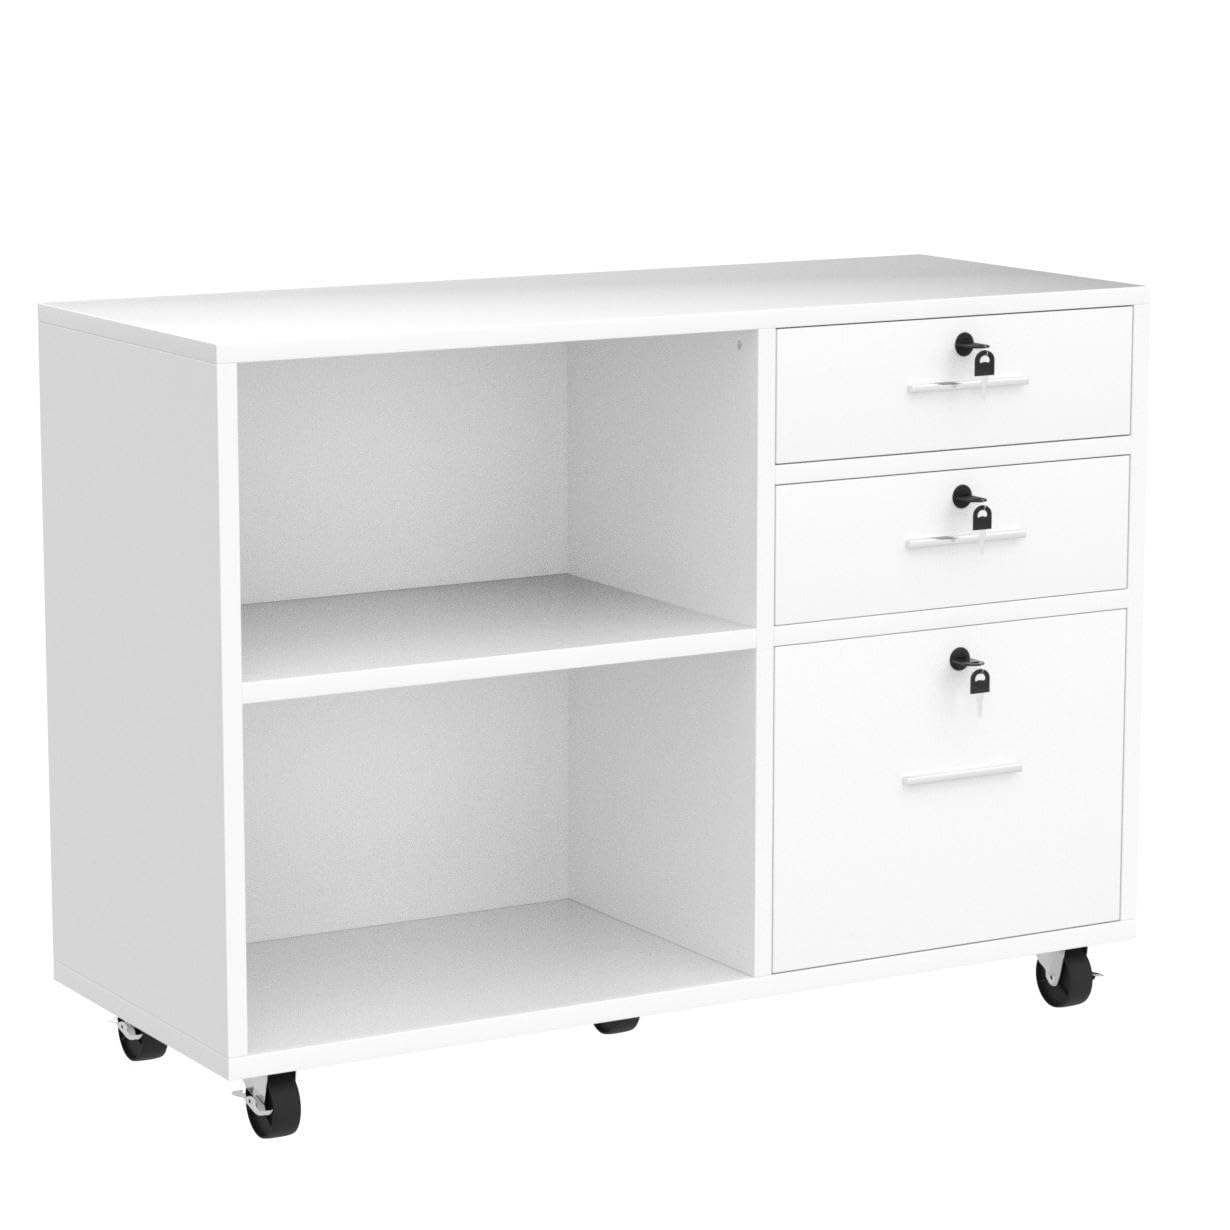 YITAHOME Wood File Cabinet, 3 Drawer Mobile Lateral Filing Cabinet, Storage Cabinet Printer Stand with 2 Open Shelves for Home Office Organization,White